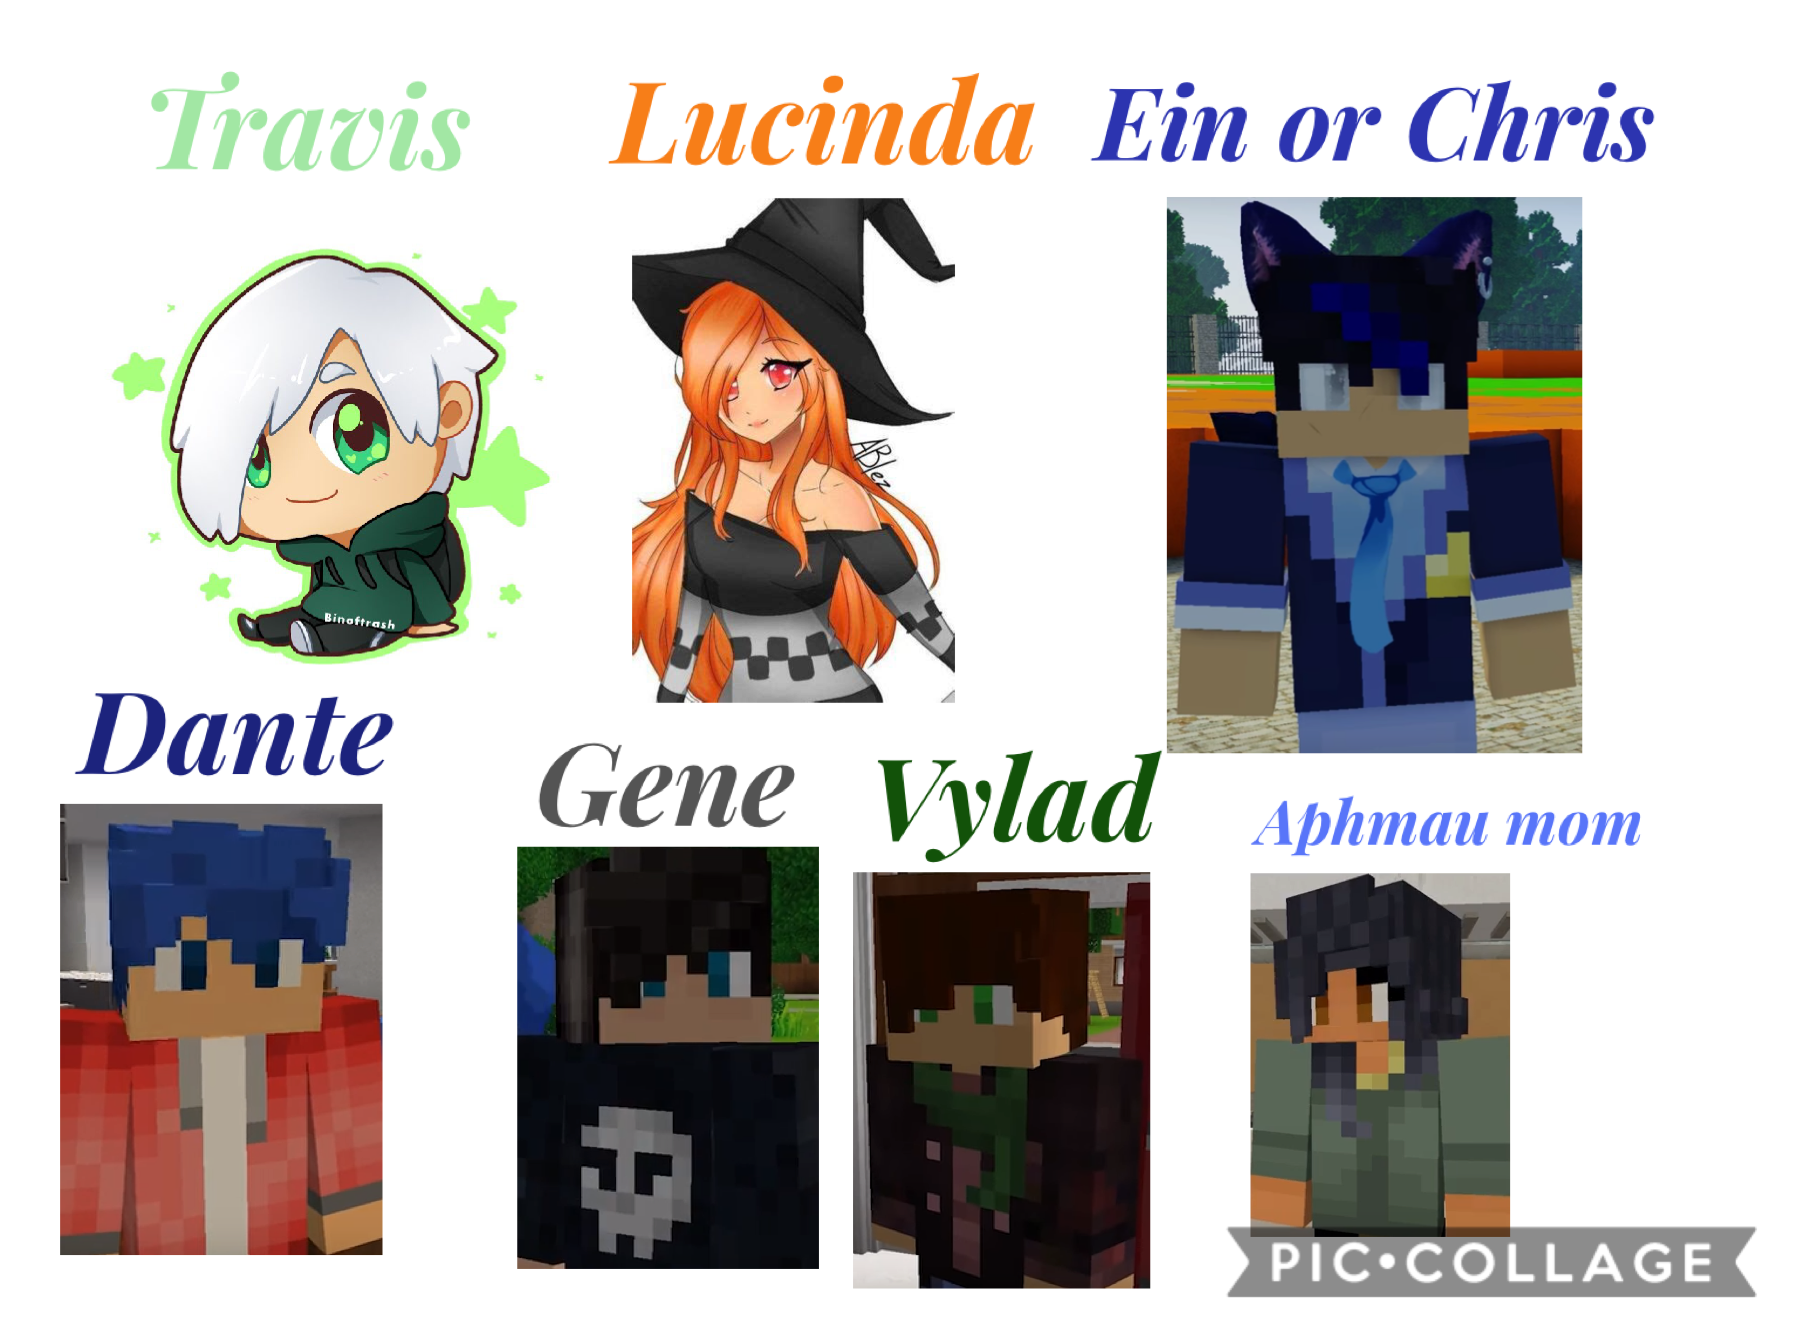 Aphmau characters  
Aphmau is a YouTuber 
Part 2